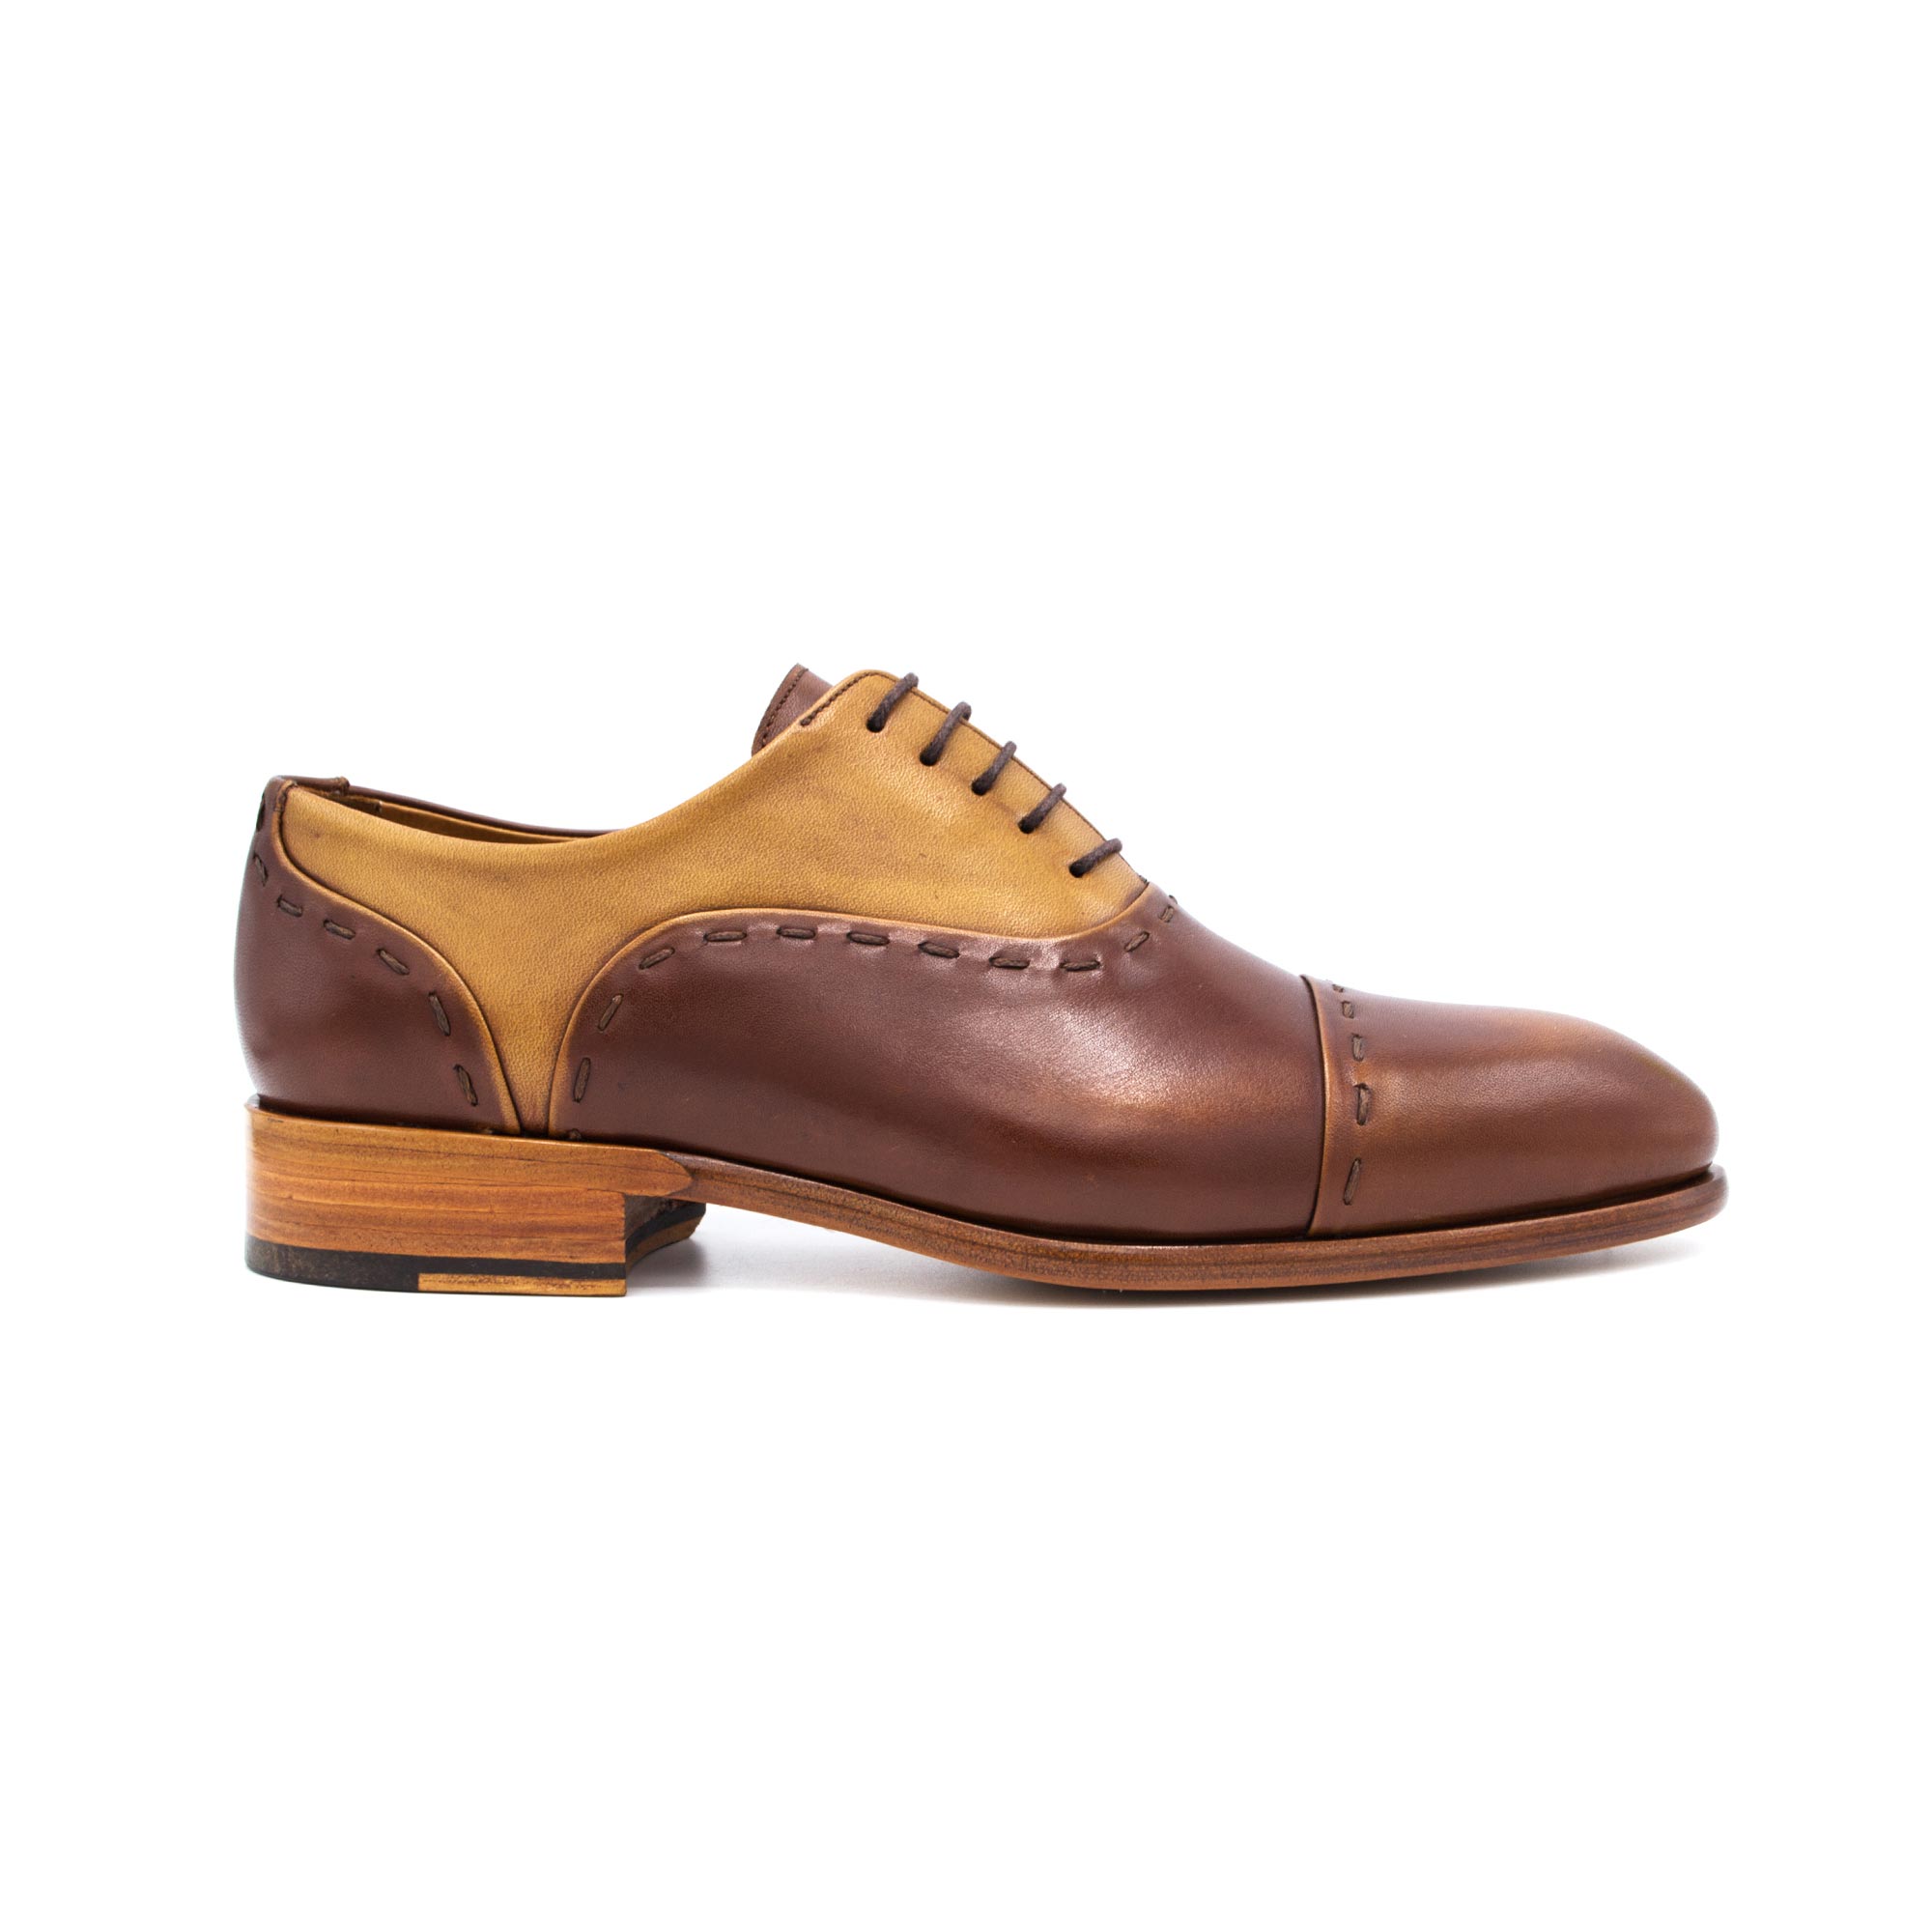 Tobacco Brown Oxford Shoes | Zerbay Collection